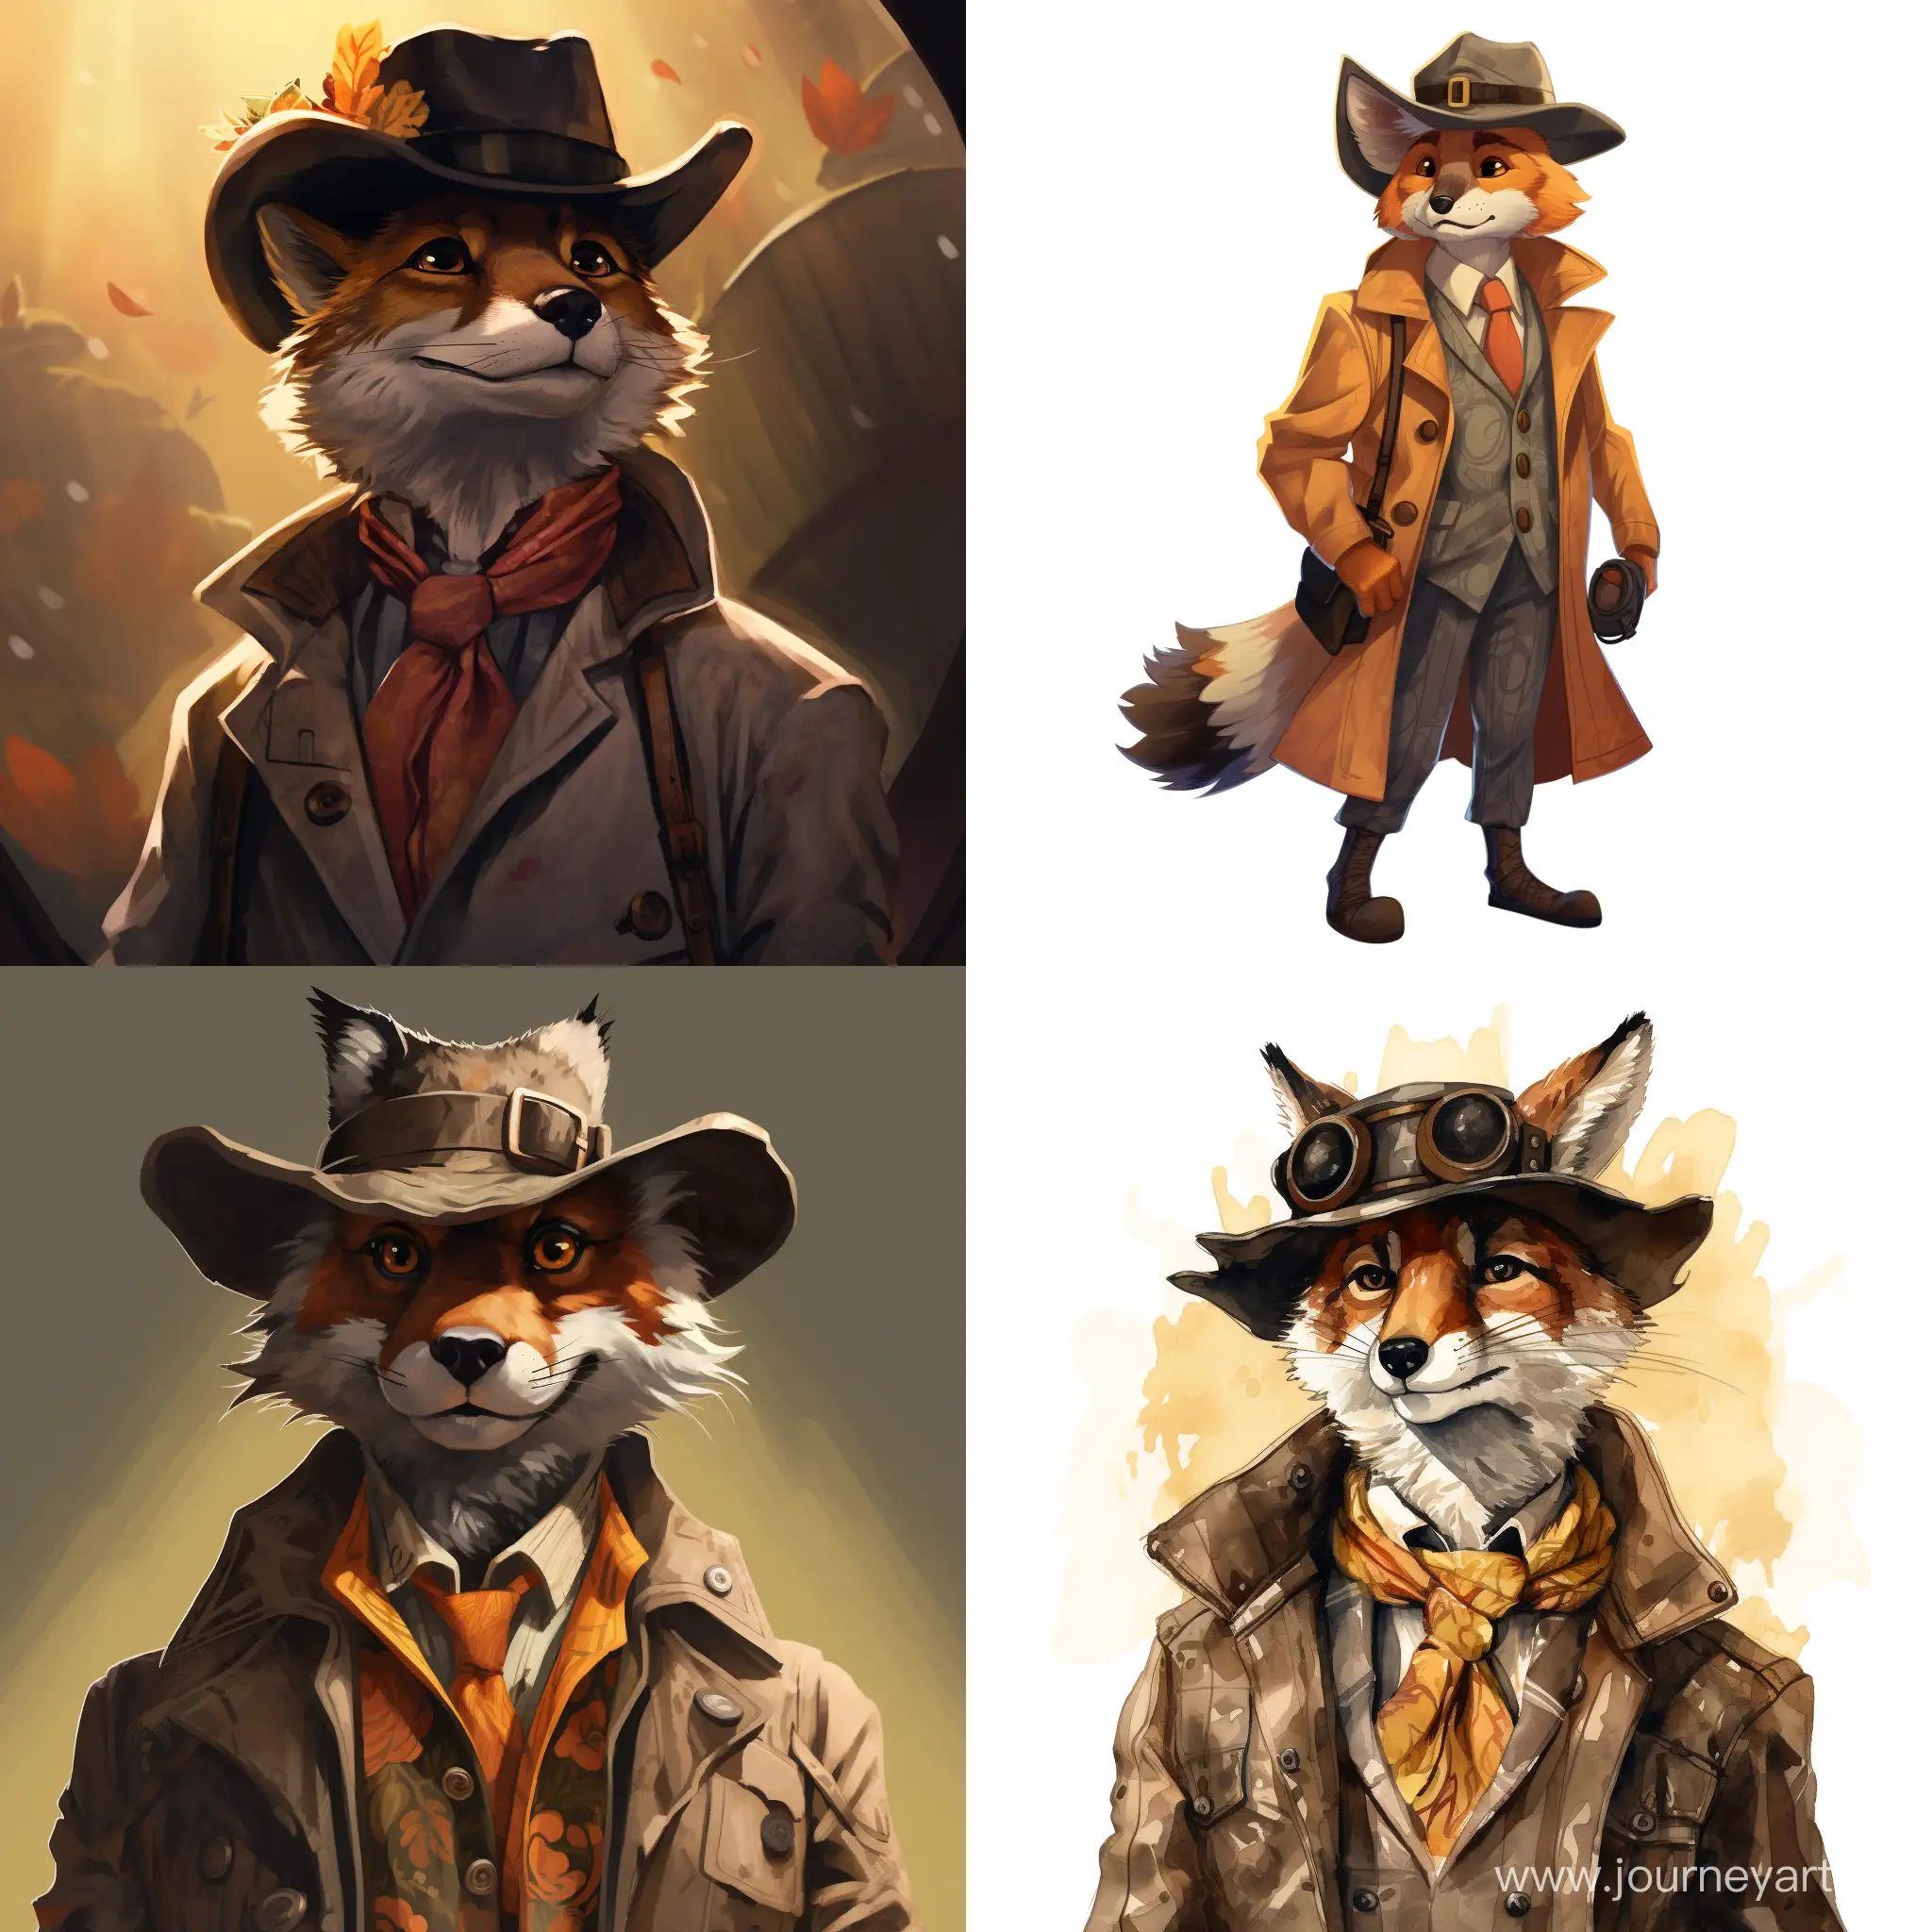 cleaver fox ,well dressed in coat and hat ,intelligent, and inspiring for youtube explainer